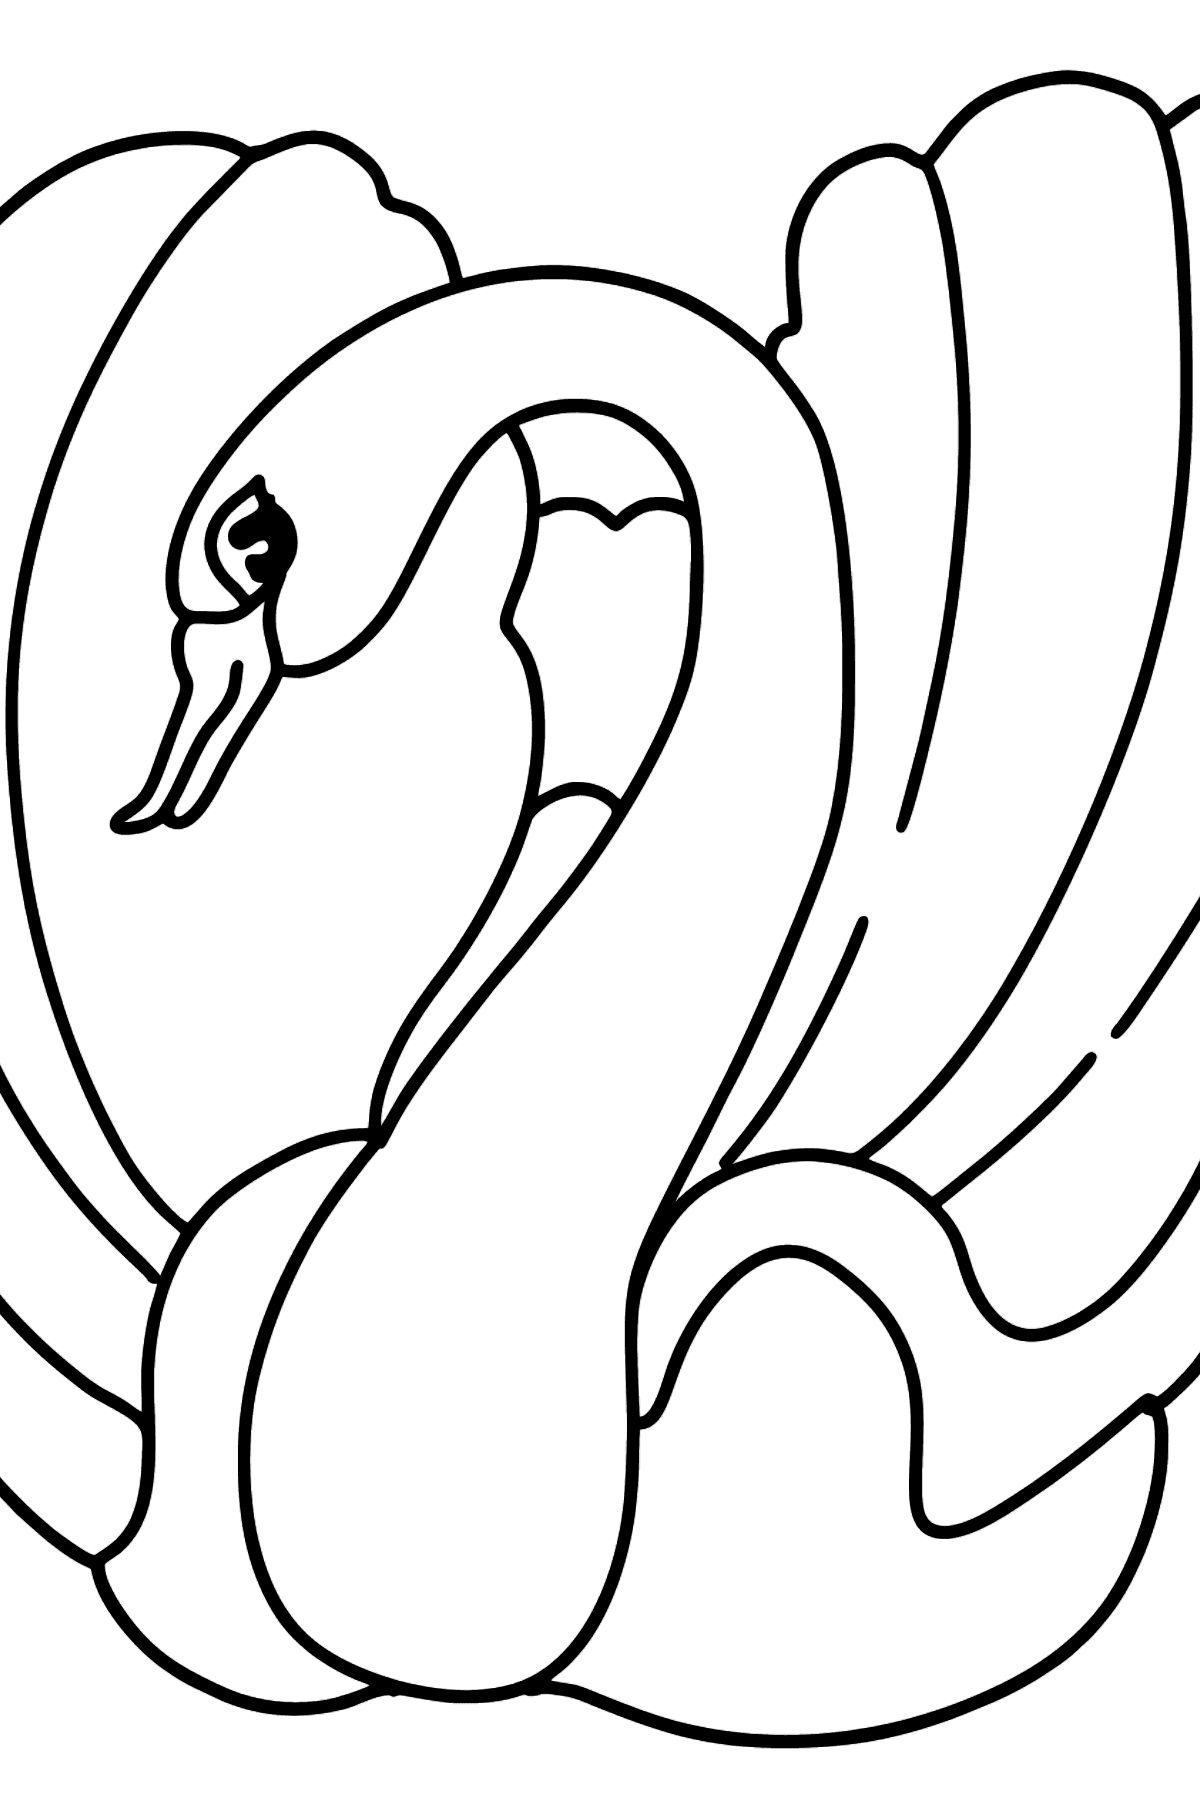 Black Swan coloring page - Coloring Pages for Kids